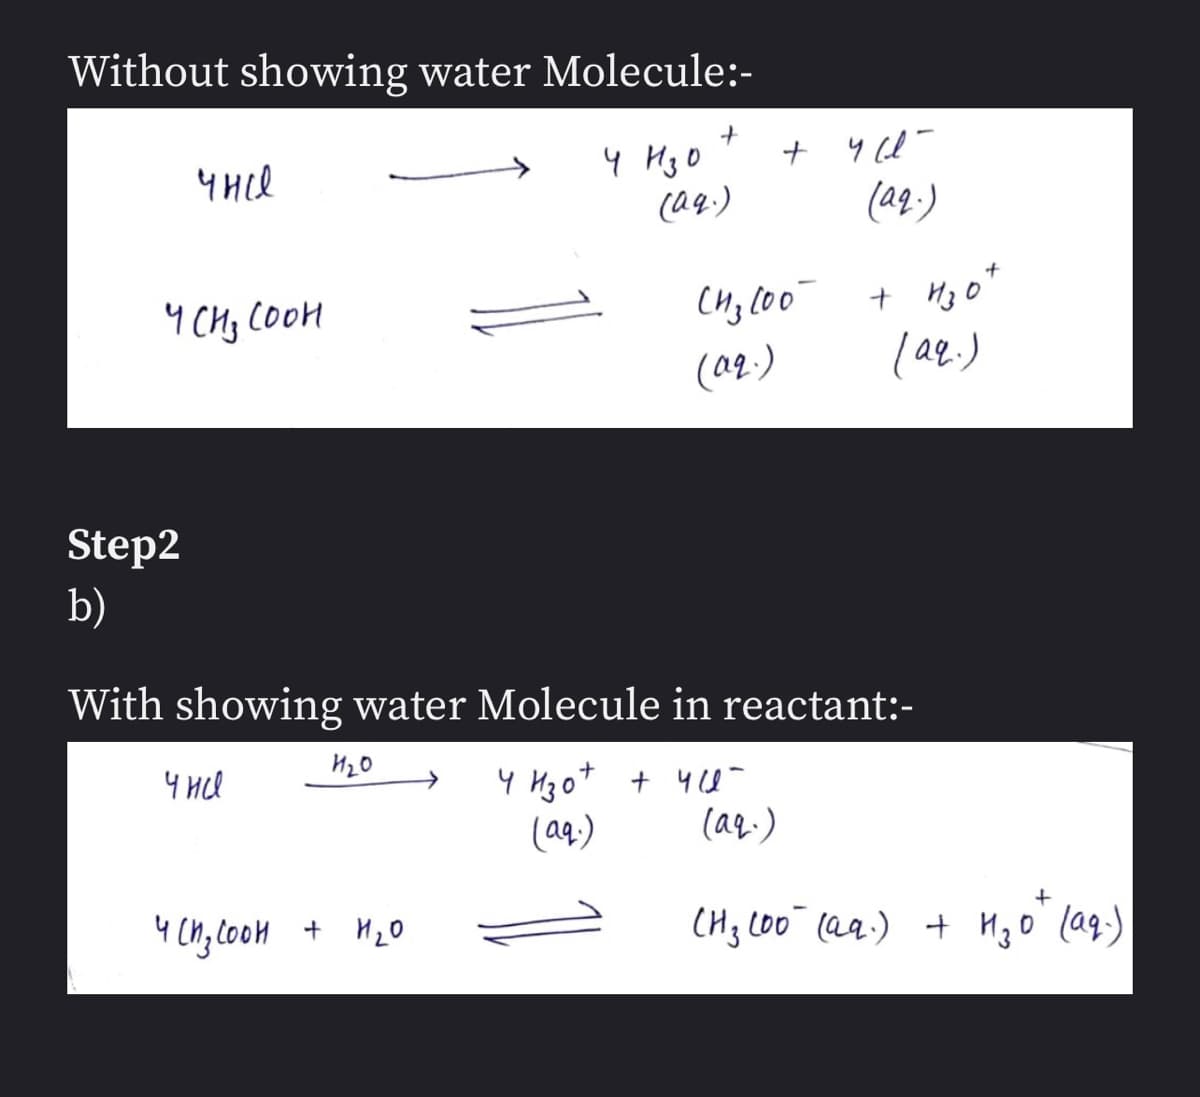 Without showing water Molecule:-
4 Hg O
(04.)
(aq.)
9 CH; Coon
Ho o*
(aq.)
lae.)
Step2
b)
With showing water Molecule in reactant:-
4 Hz o+ + 4U-
(aa.)
(aq.)
4 Cn; CooM
+ H20
(H3 LOO (aq.) + HzO lag)
